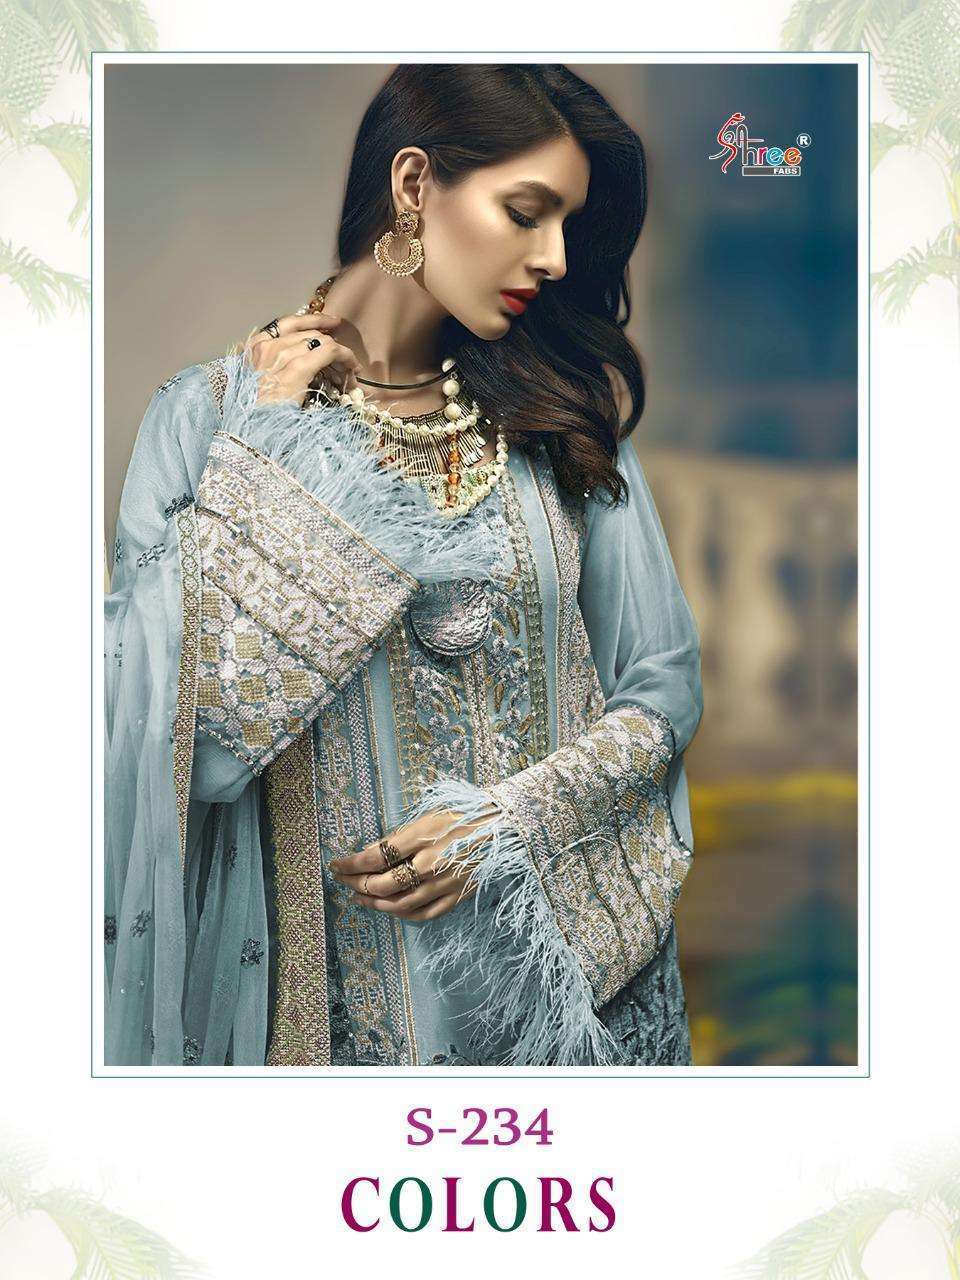 SHREE FAB PRESENTS S 234 COLORS GEORGETTE WITH EMBROIDERY WHOLESALE PAKISTANI SUITS